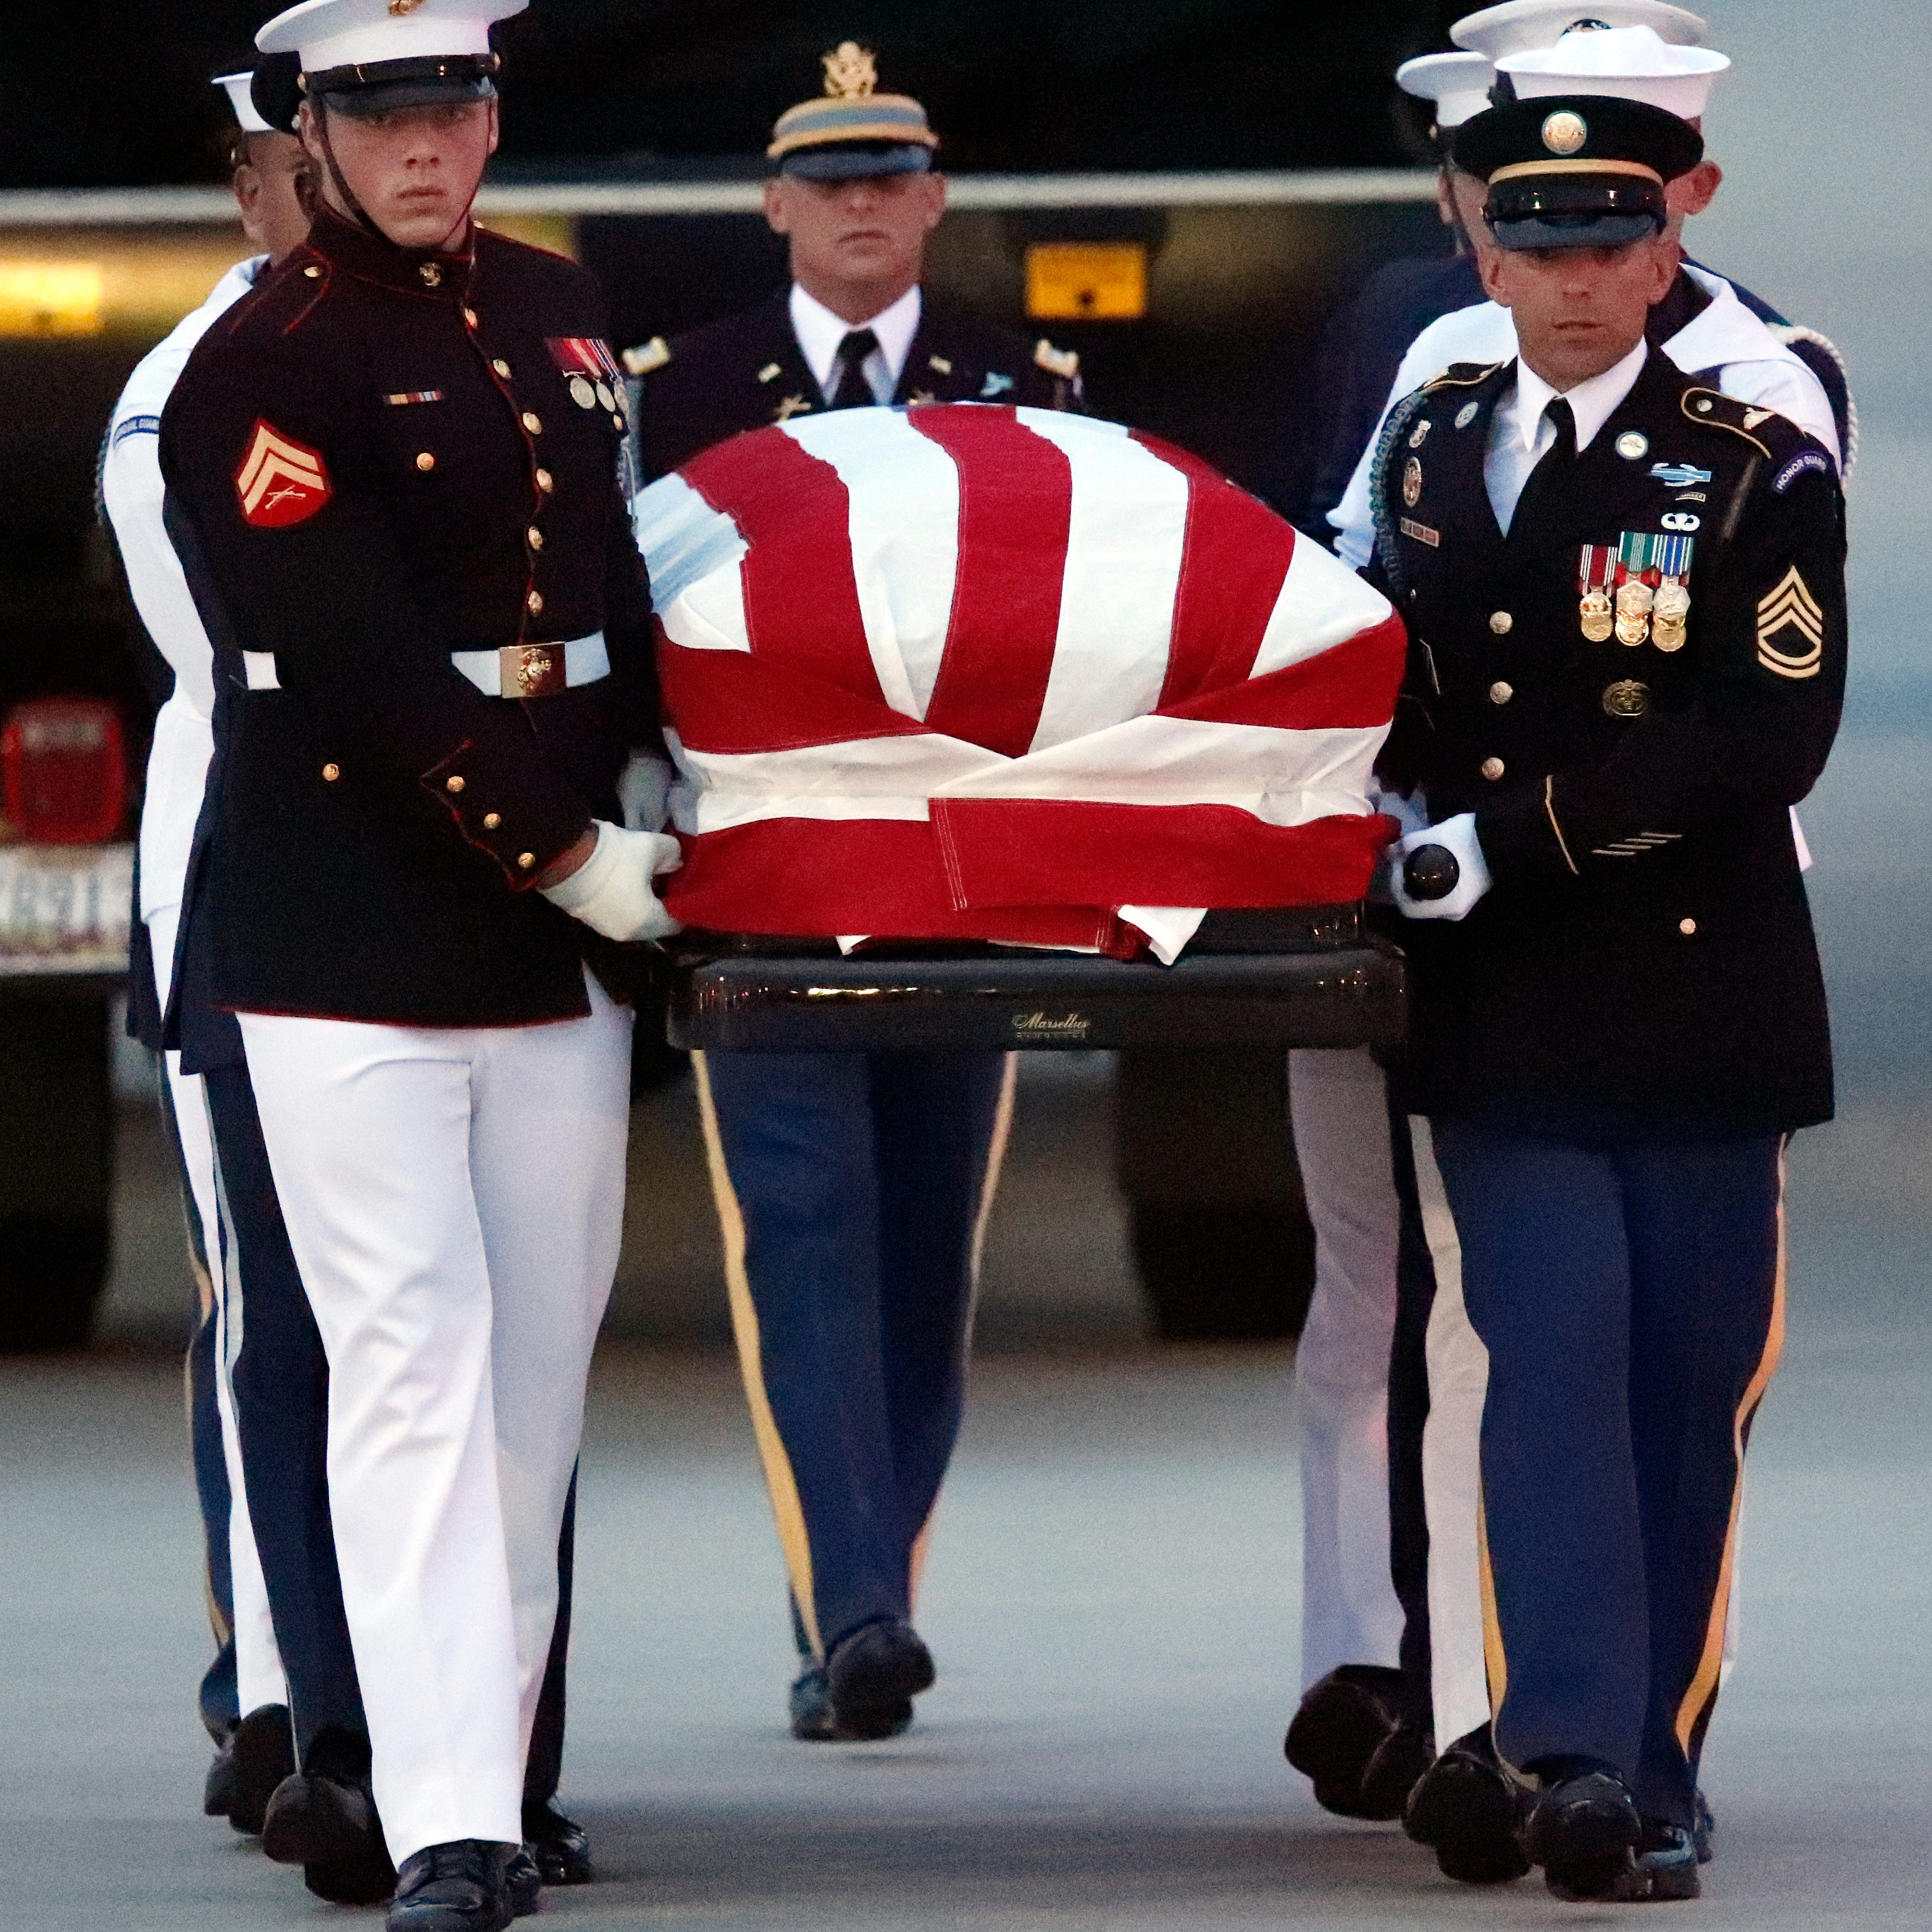 The flag-draped casket of Sen. John McCain, R-Ariz., is carried by an Armed Forces body bearer team to a hearse, Aug. 30, 2018, at Andrews Air Force Base, Md.